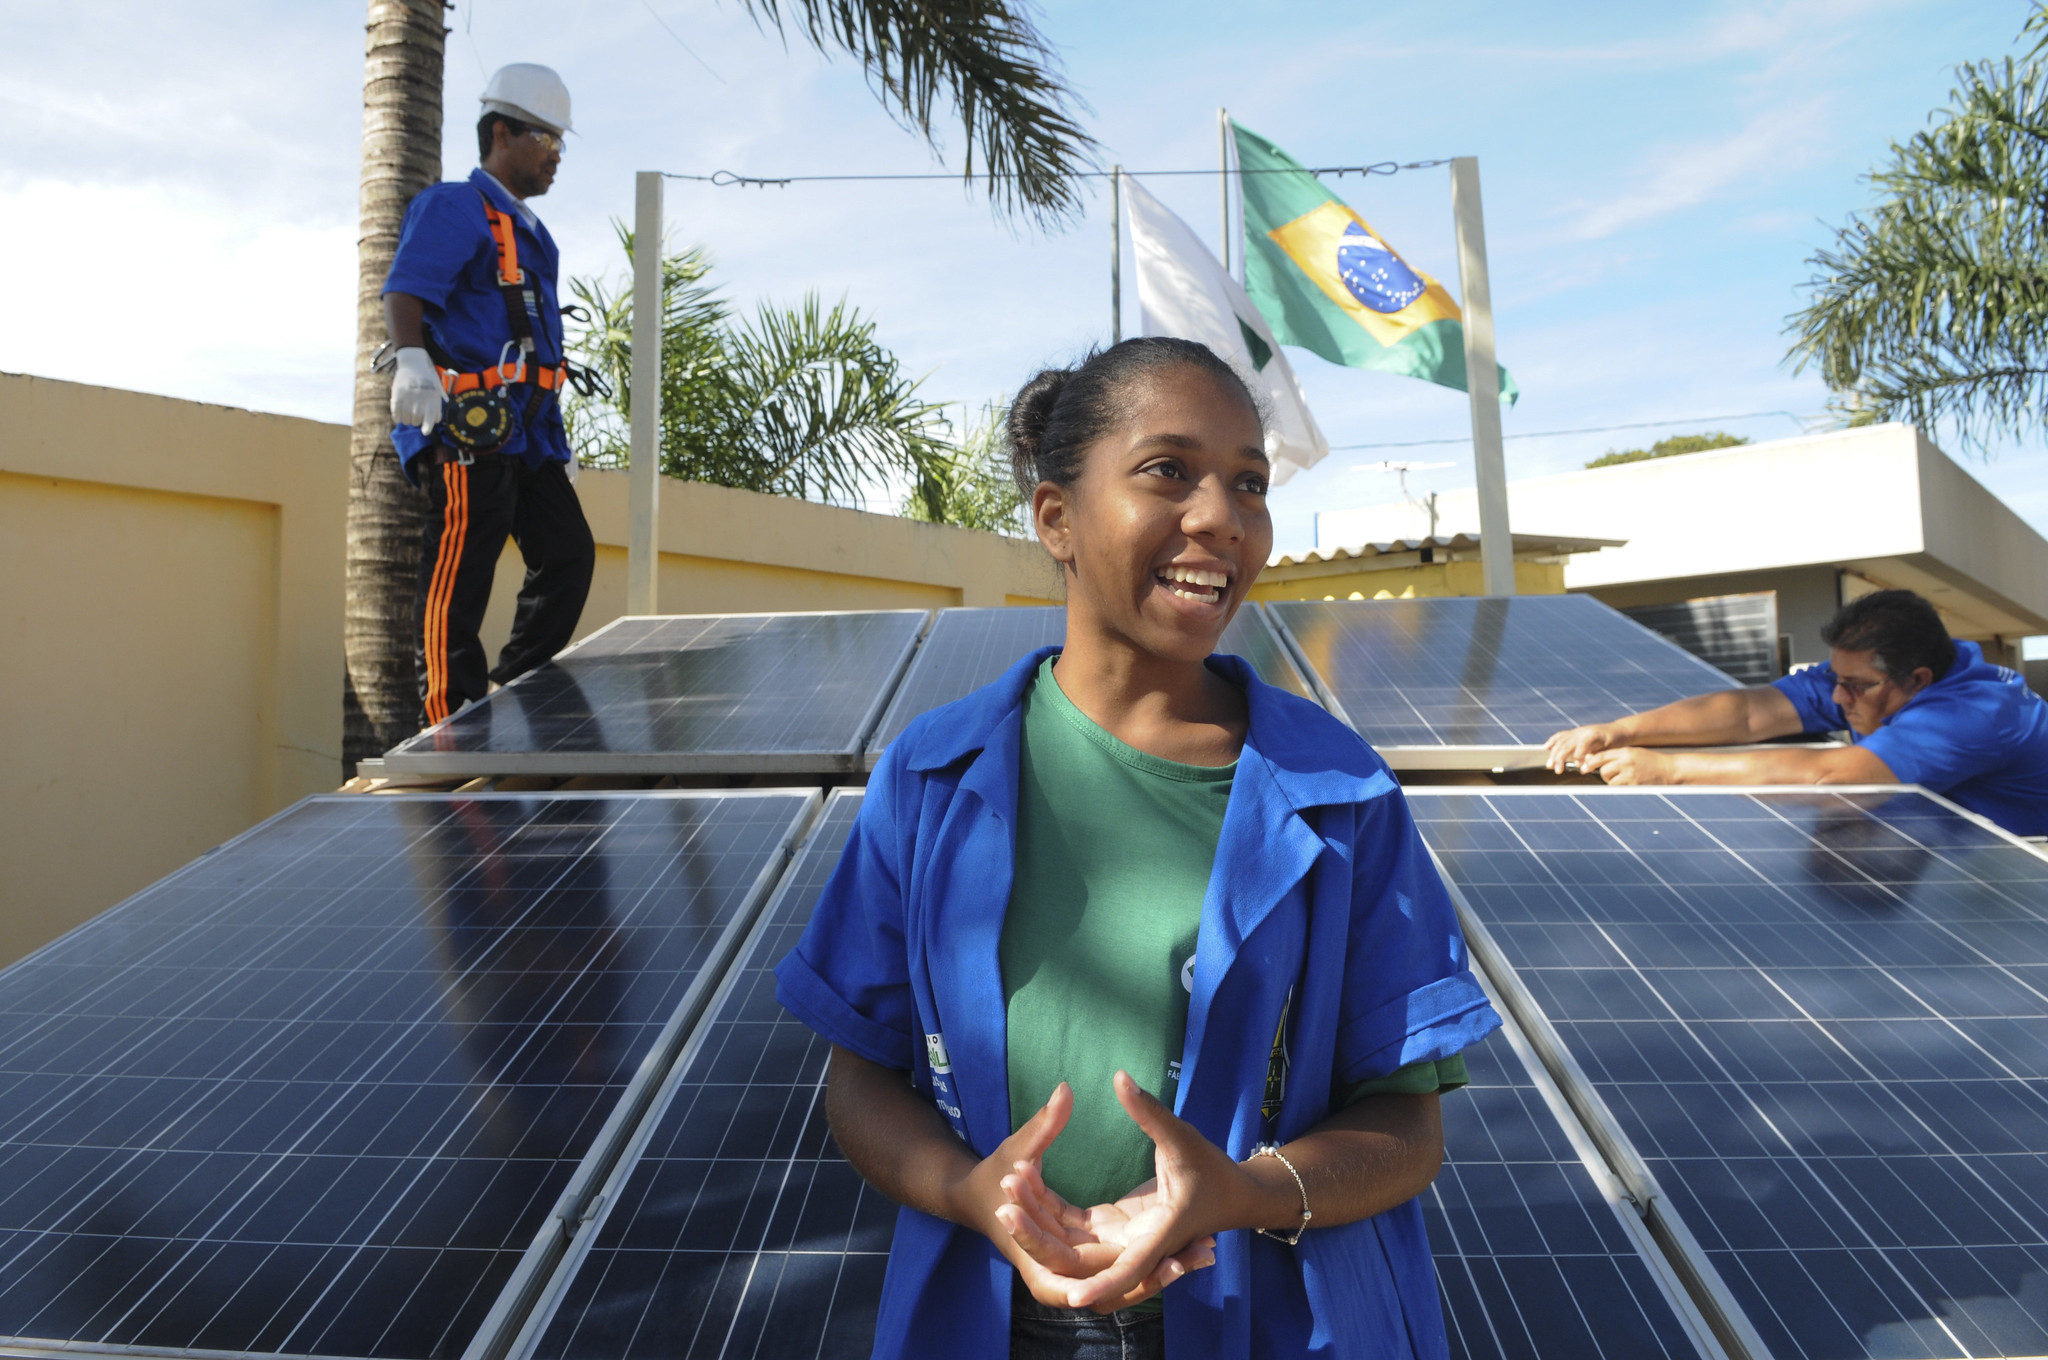 <p>Student Brenda Rodrigues da Silva works on the installation of solar panels at Fábrica Social, a professional training centre in Brasília, Brazil. Last year, solar energy became the country’s second-largest source of electricity (Image: <a href="https://flic.kr/p/24dCxXk">Tony Winston</a> / <a href="https://flickr.com/people/agenciabrasilia/">Agência Brasília</a>, <a href="https://creativecommons.org/licenses/by/2.0/">CC BY</a>)</p>